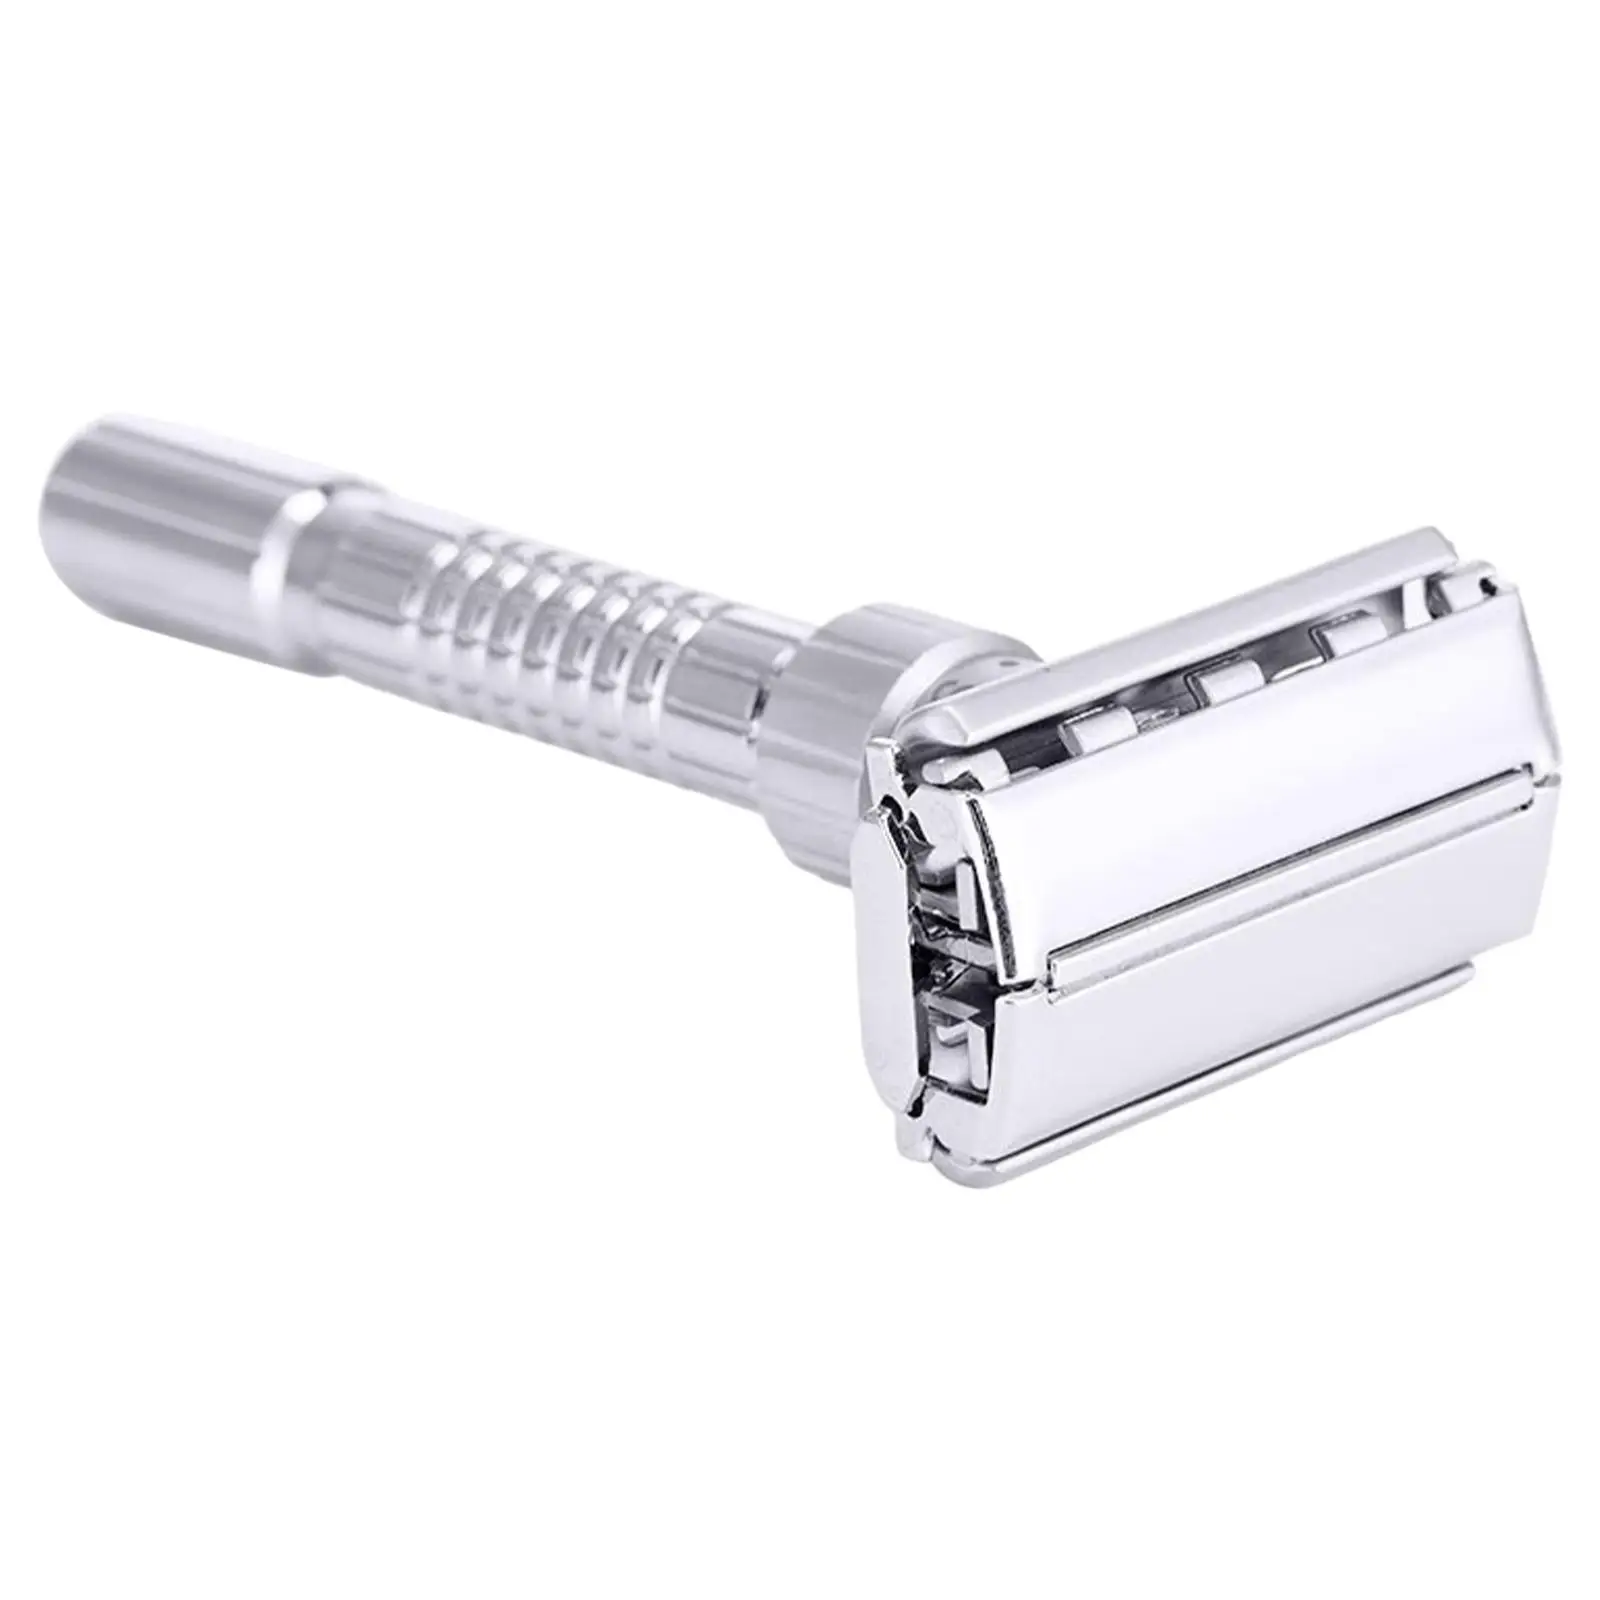 Manual  Safety , Zinc Alloy Plated, with 5 , Reusable Beard Shaver, Safety  Kit, Shaving  Everyday Use Men